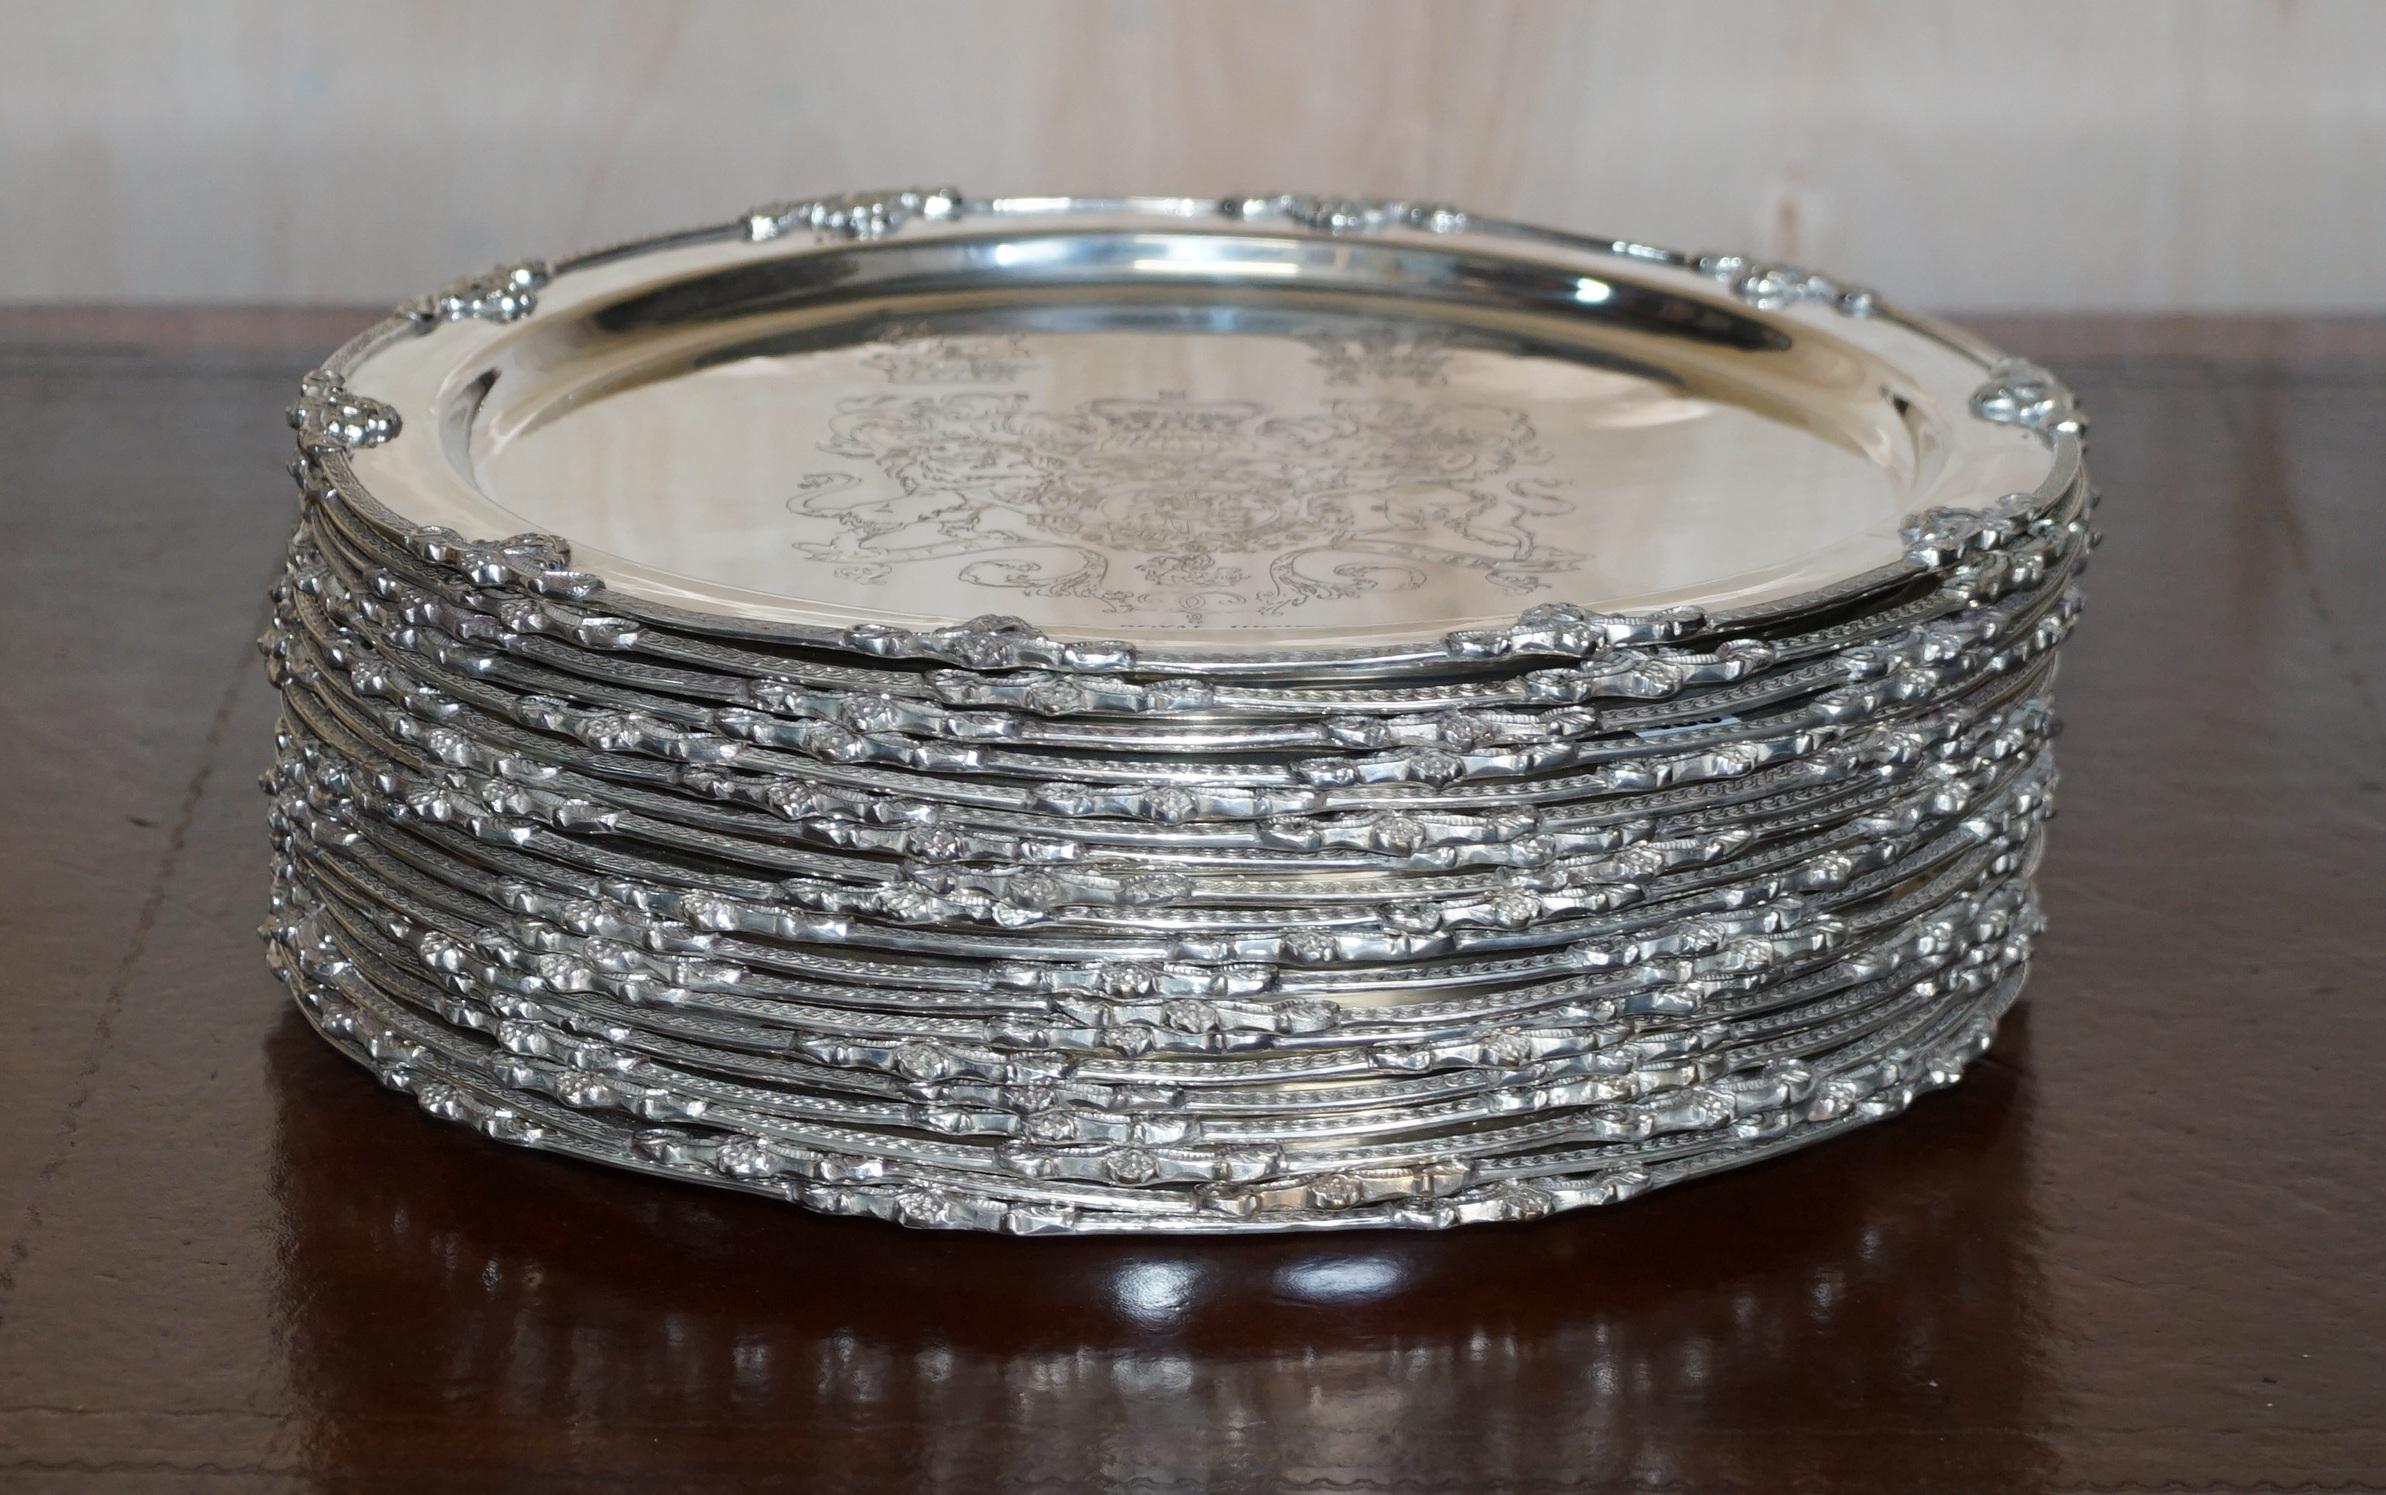 We are delighted to offer 1 of 19 Sterling Silver plated, fully hallmarked for Sheffield 1919 Serving trays with engraved Armorial coat of arms crest for King George IV “His Royal Highness George Auguseue Frederick”

This sale is for one tray with